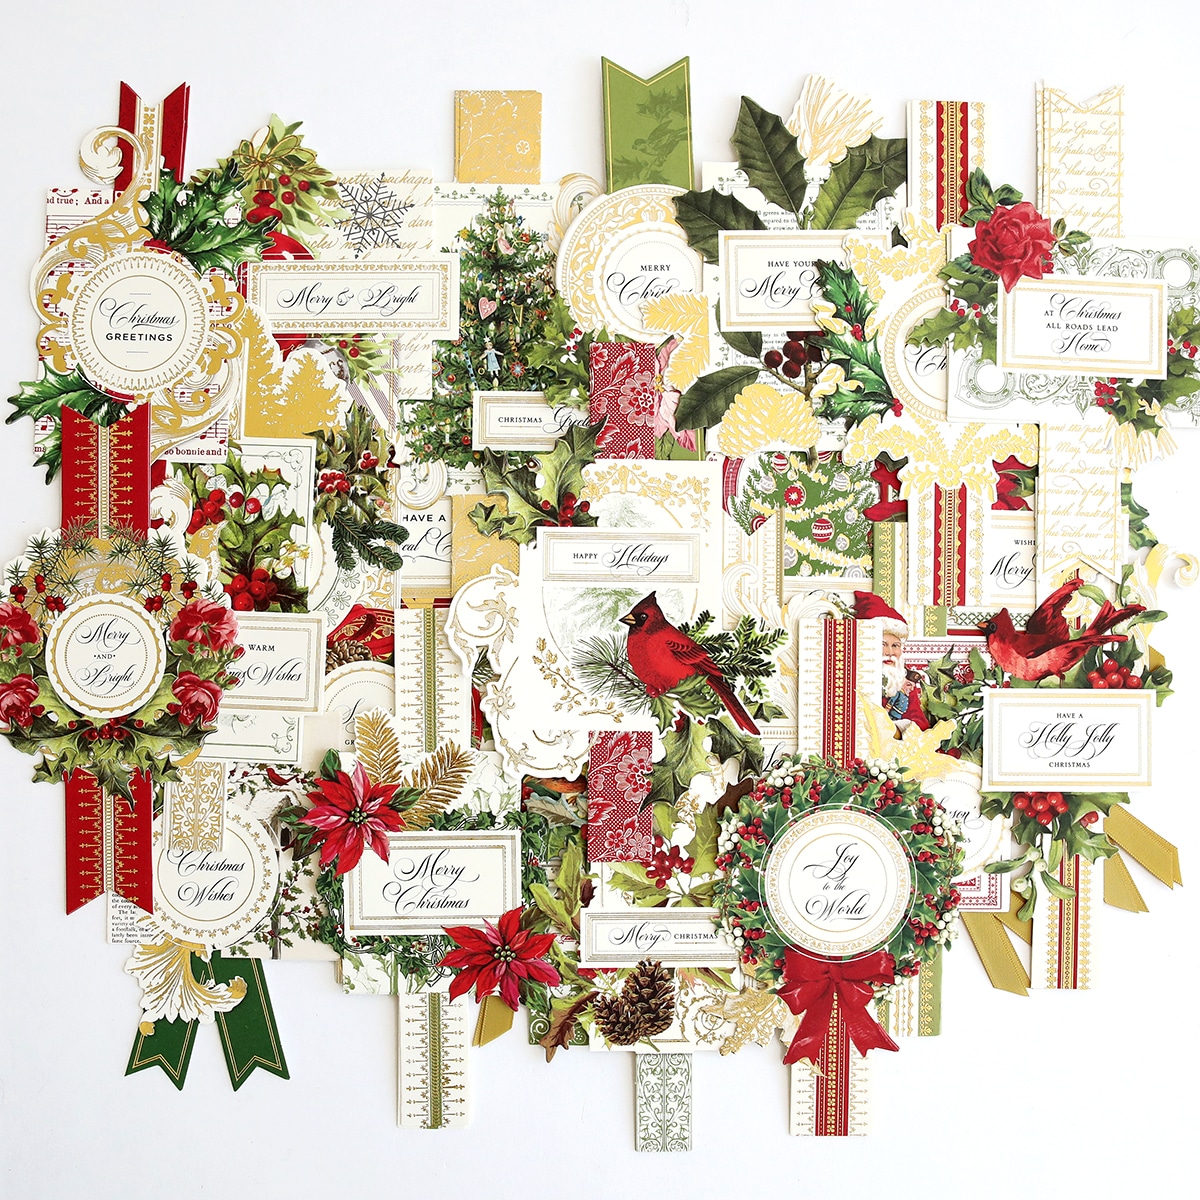 A collection of christmas cards and decorations on a white background.